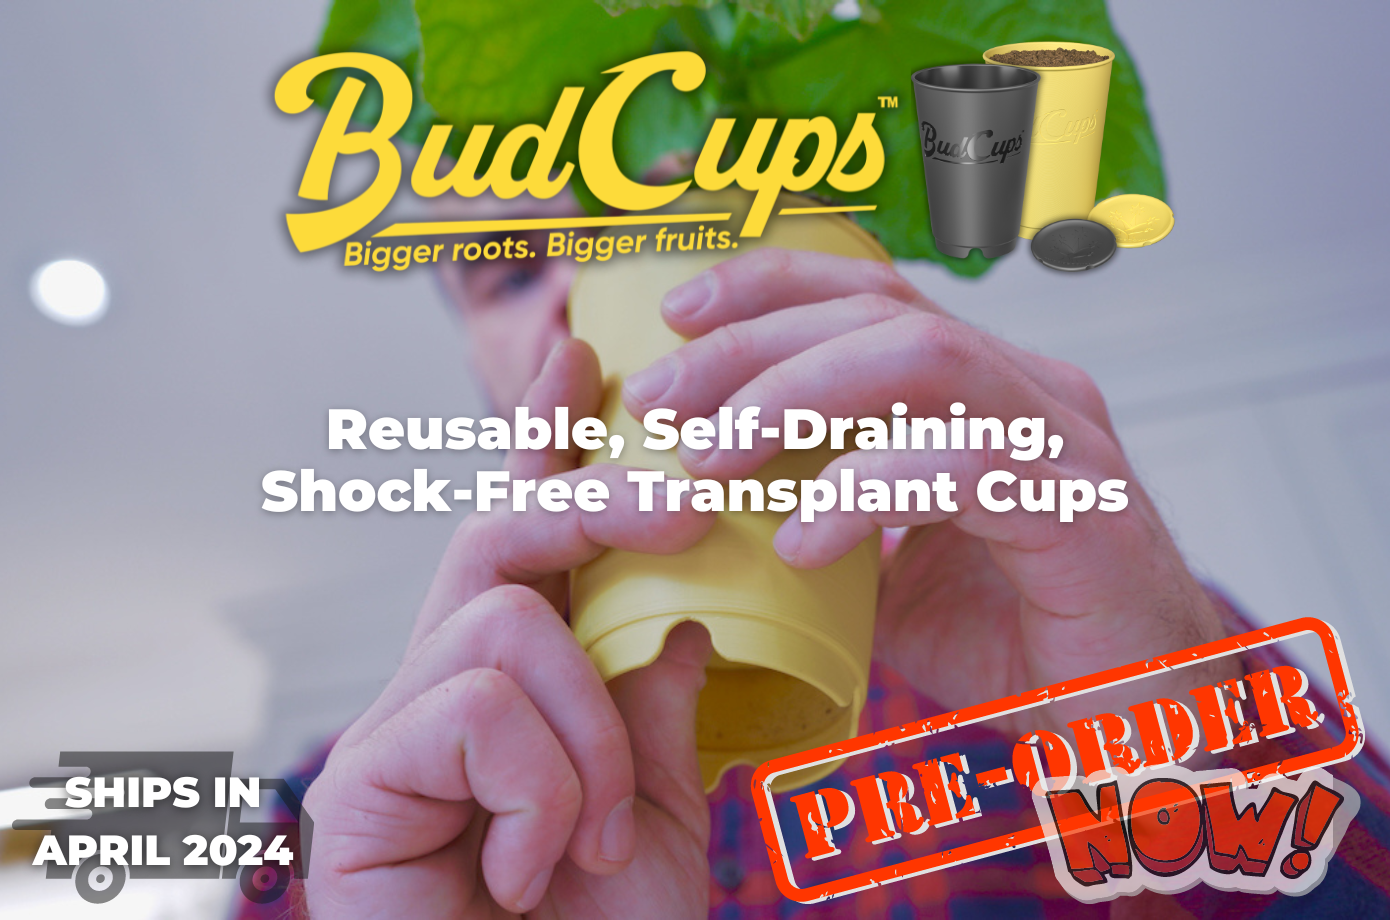 BudCups from the bottom being popped by a hand. Transplant cups for plants